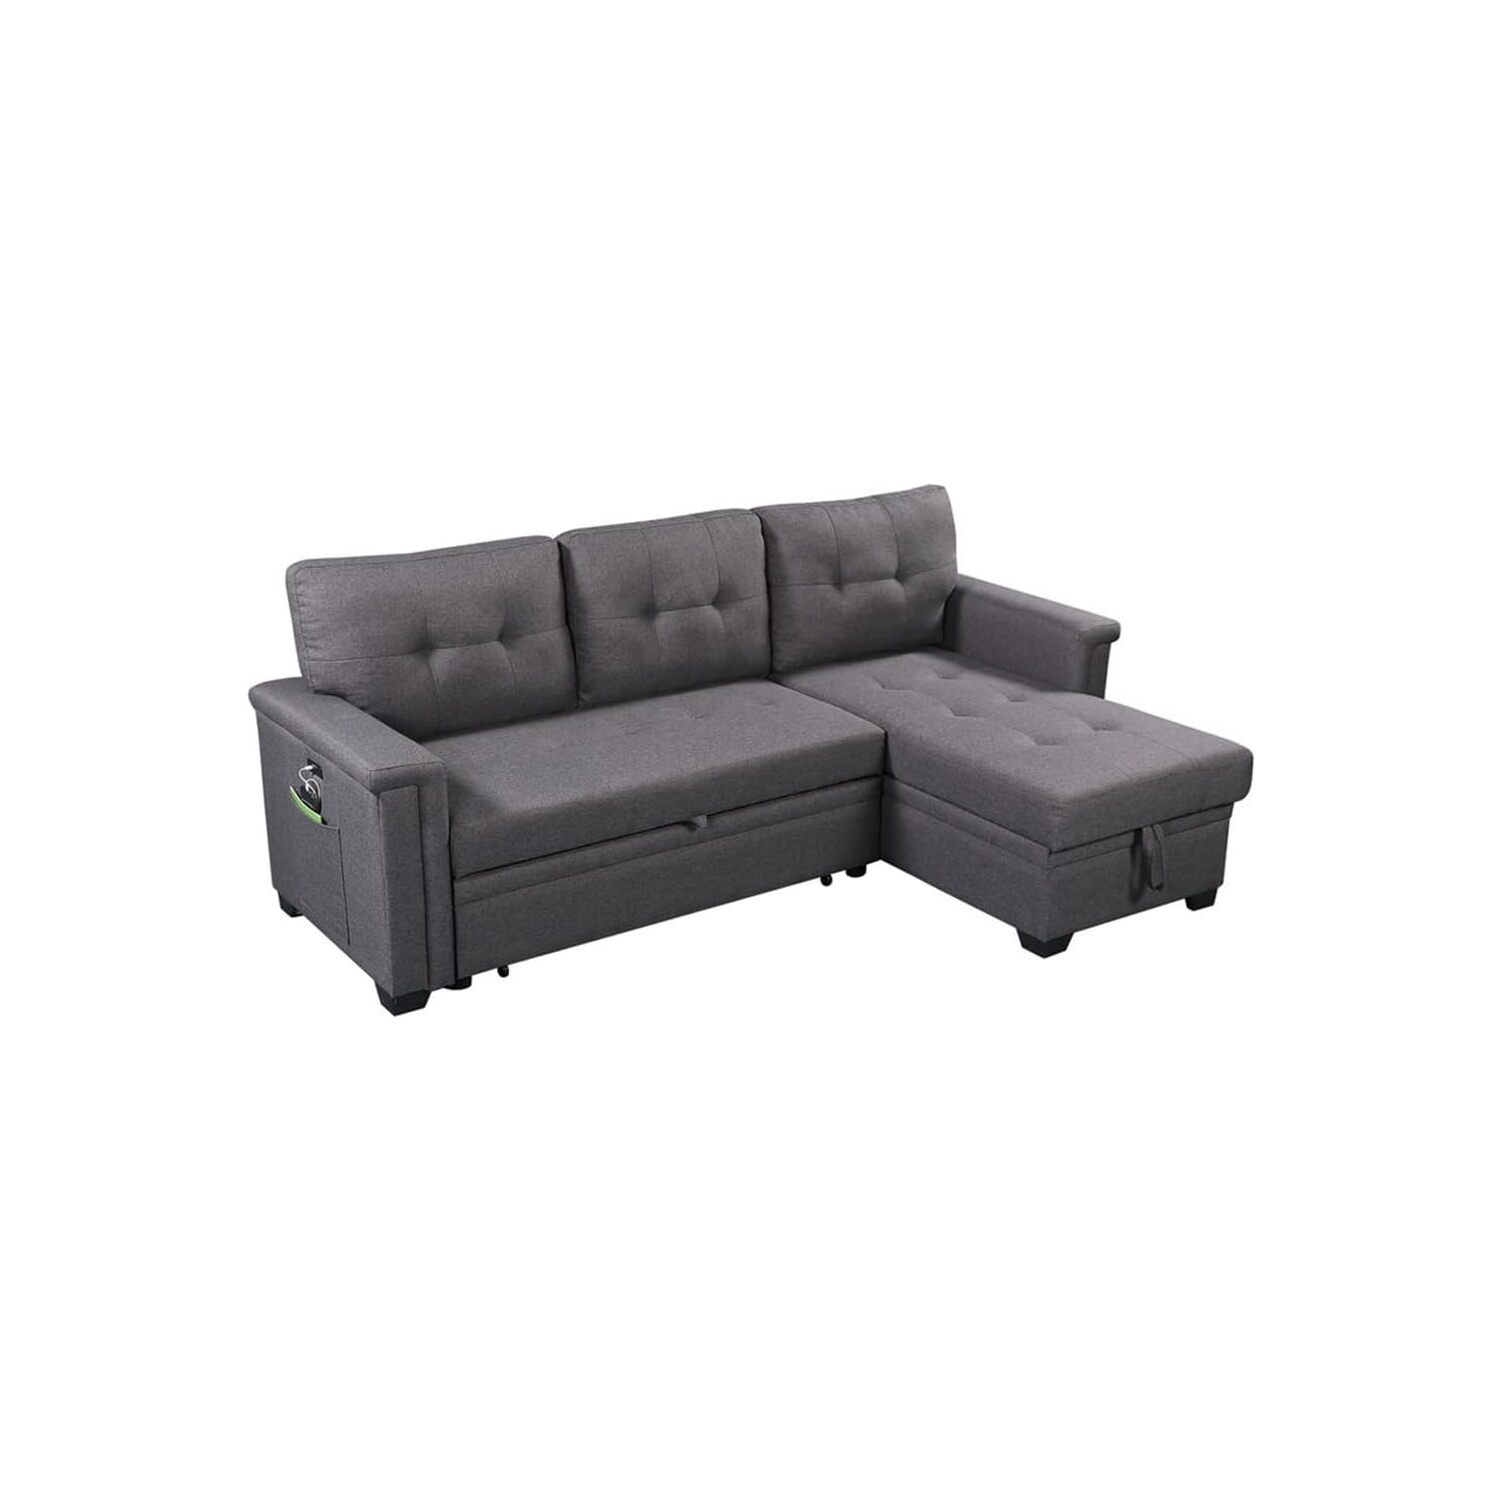 Lilola Home Sectional Sofa, Gray Cotton Blend - image 1 of 9